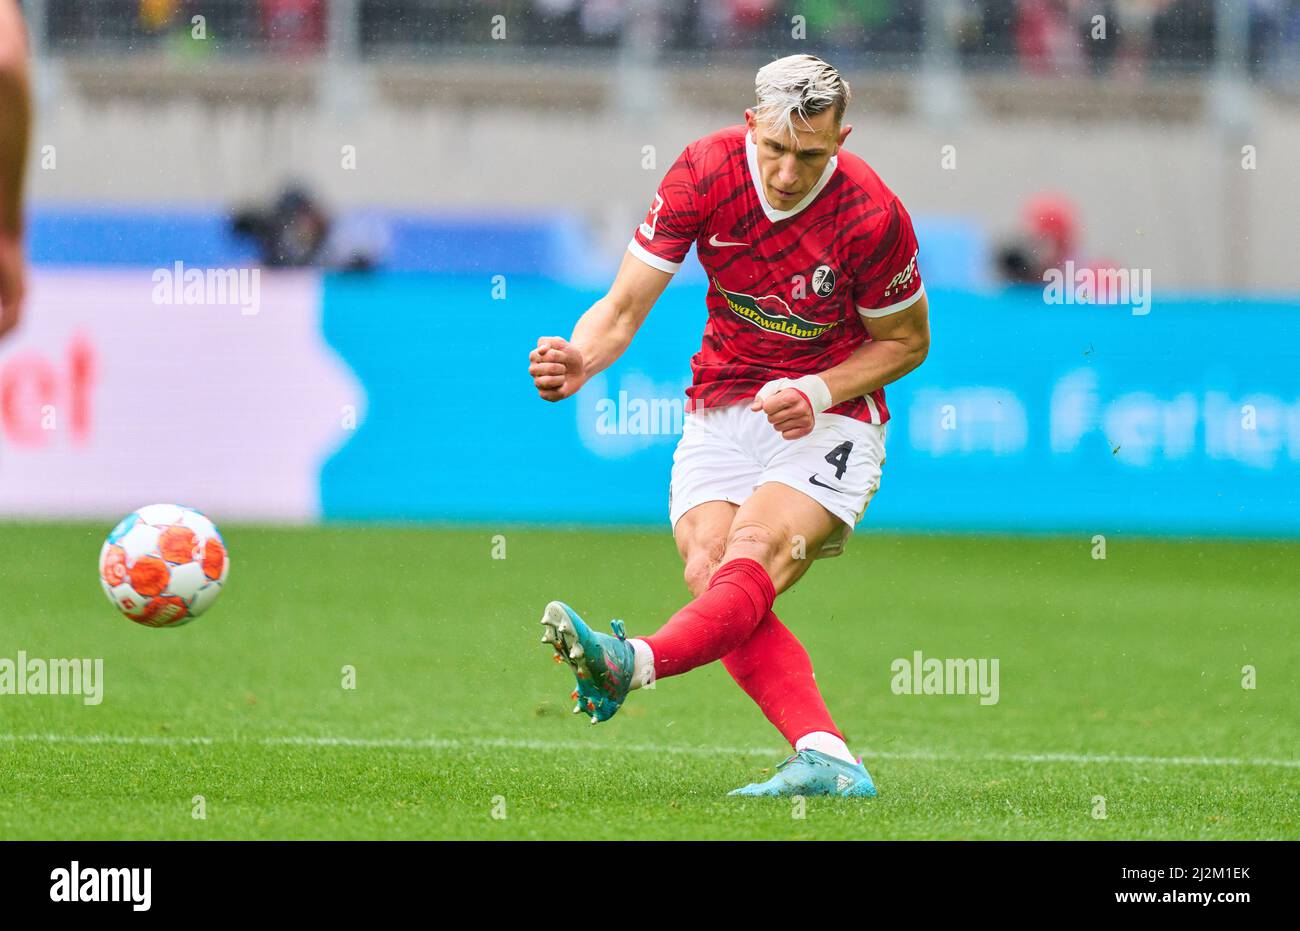 Freiburg, Germany. 02nd Apr, 2022. Nico Schlotterbeck, FRG 4  in the match SC FREIBURG - FC BAYERN MÜNCHEN 1-4 1.German Football League on April 2, 2022 in Freiburg, Germany. Season 2021/2022, matchday 28, 1.Bundesliga, FCB, München, 28.Spieltag. FCB, © Peter Schatz / Alamy Live News    - DFL REGULATIONS PROHIBIT ANY USE OF PHOTOGRAPHS as IMAGE SEQUENCES and/or QUASI-VIDEO - Credit: Peter Schatz/Alamy Live News Stock Photo